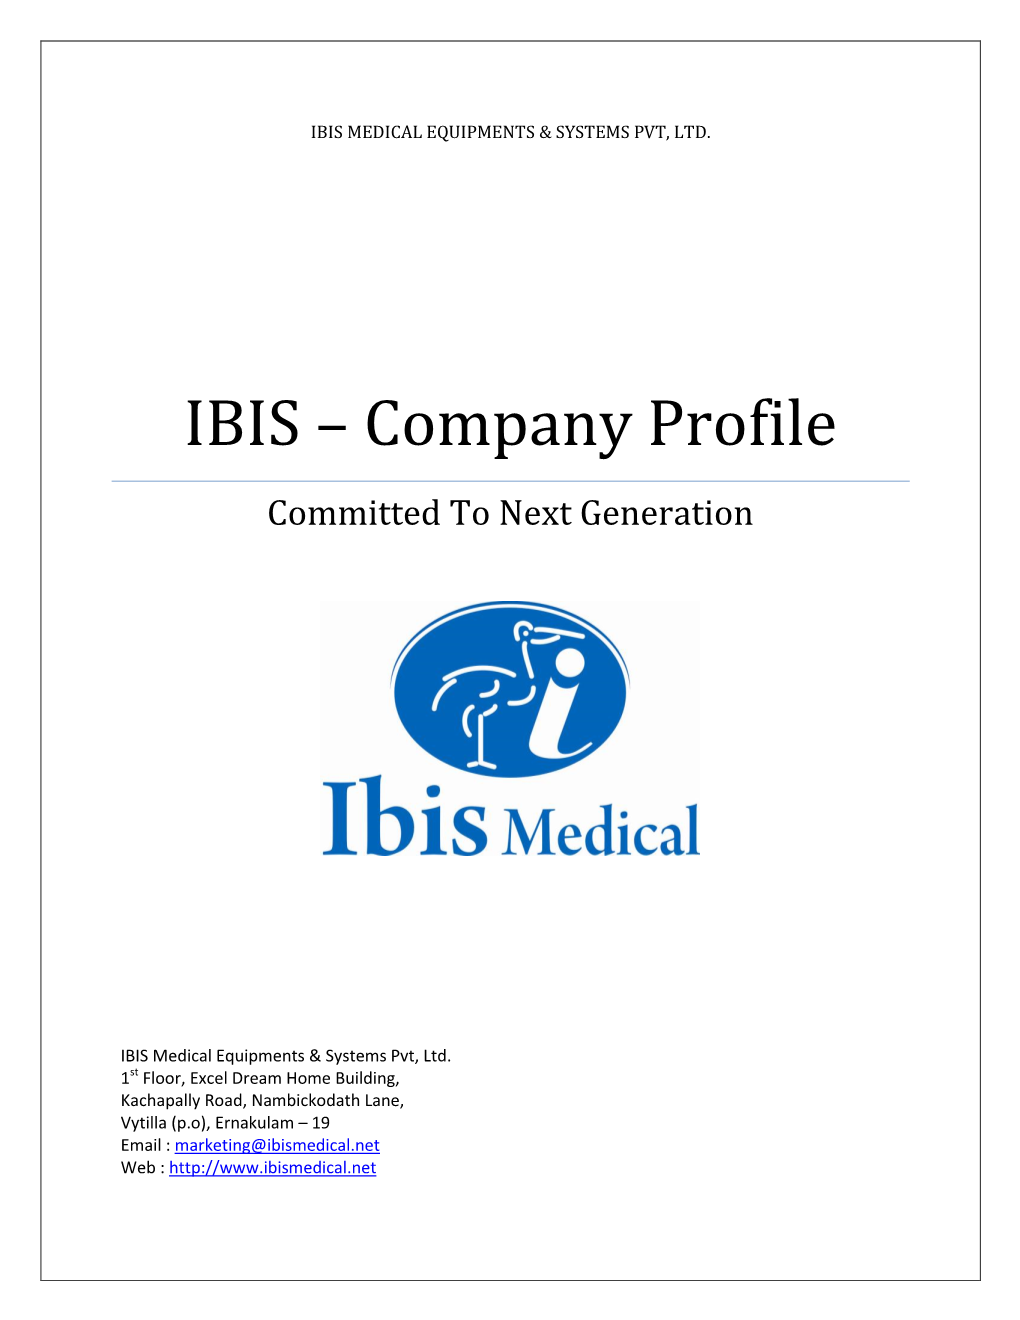 IBIS – Company Profile Committed to Next Generation